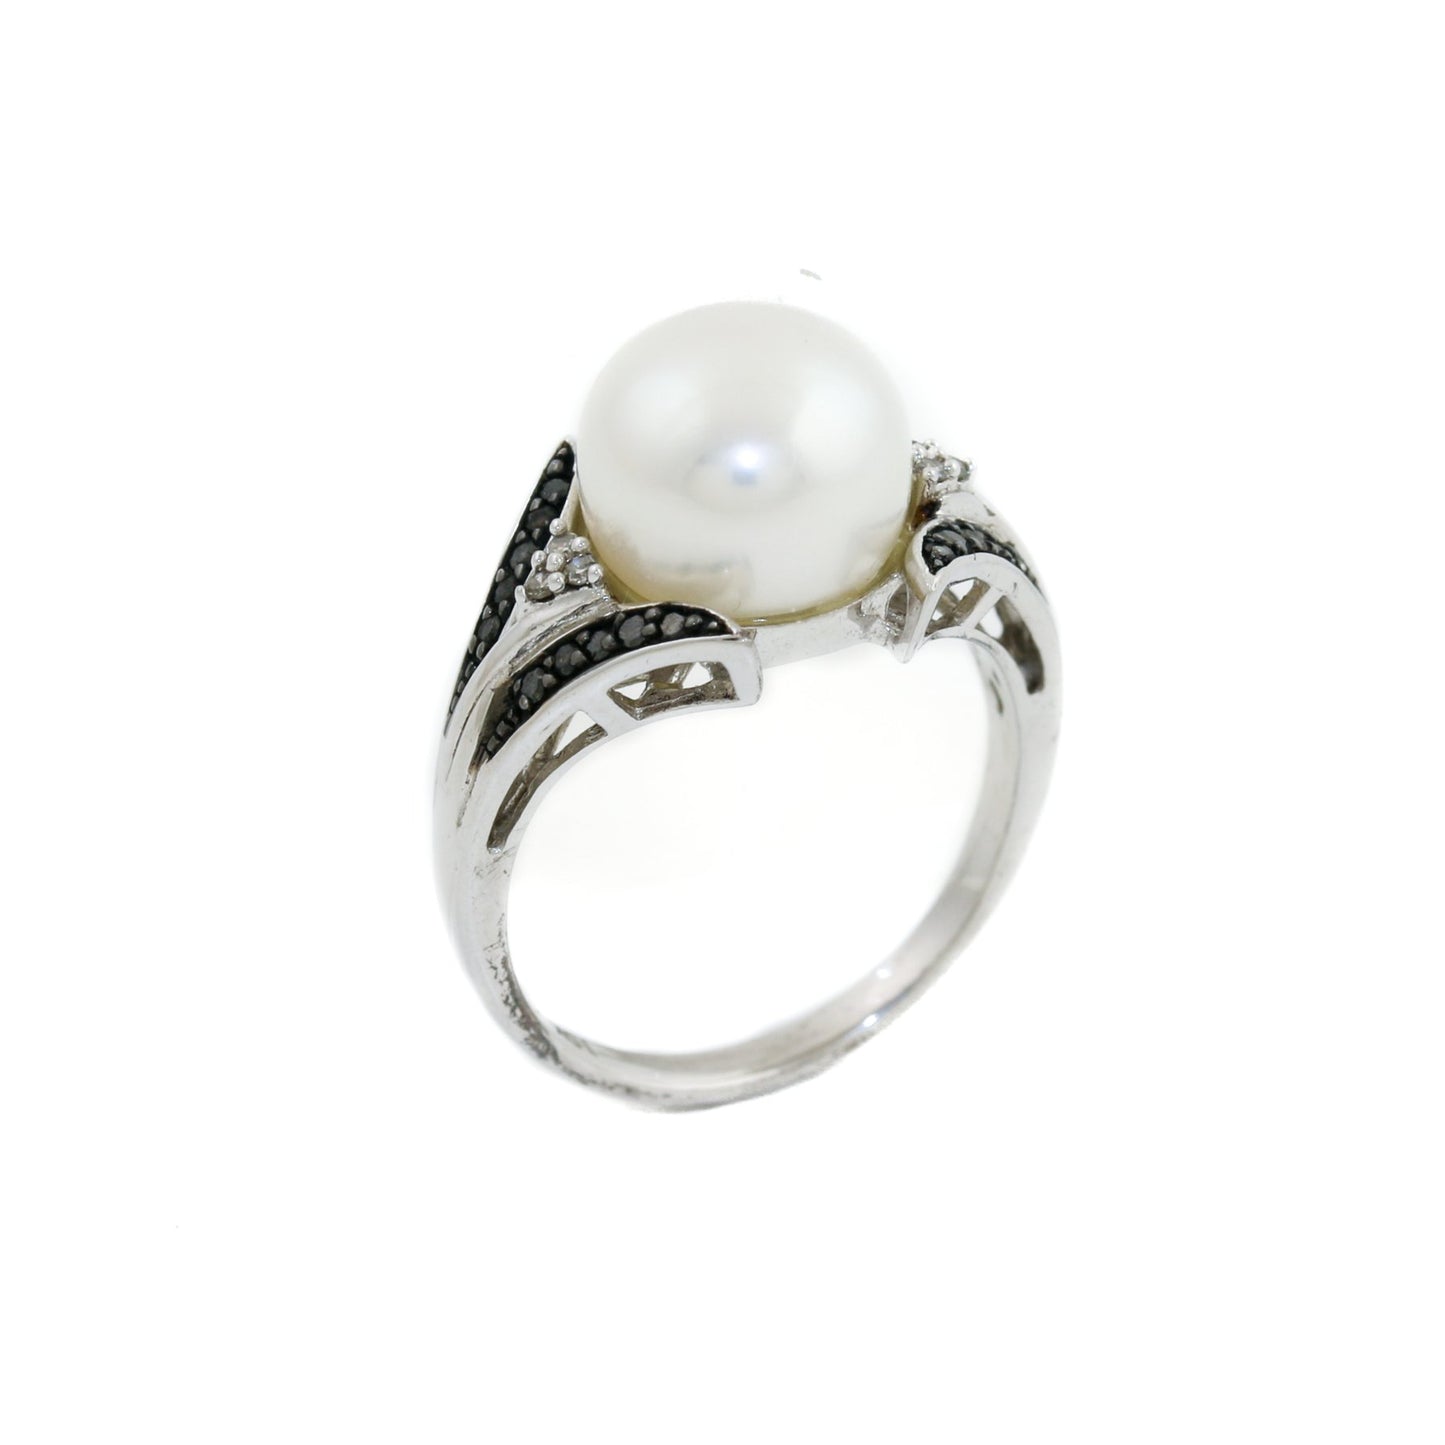 10k White Gold x Accented "Alwand Vahan" Mixed Diamond & Sea Pearl Ring - Kingdom Jewelry